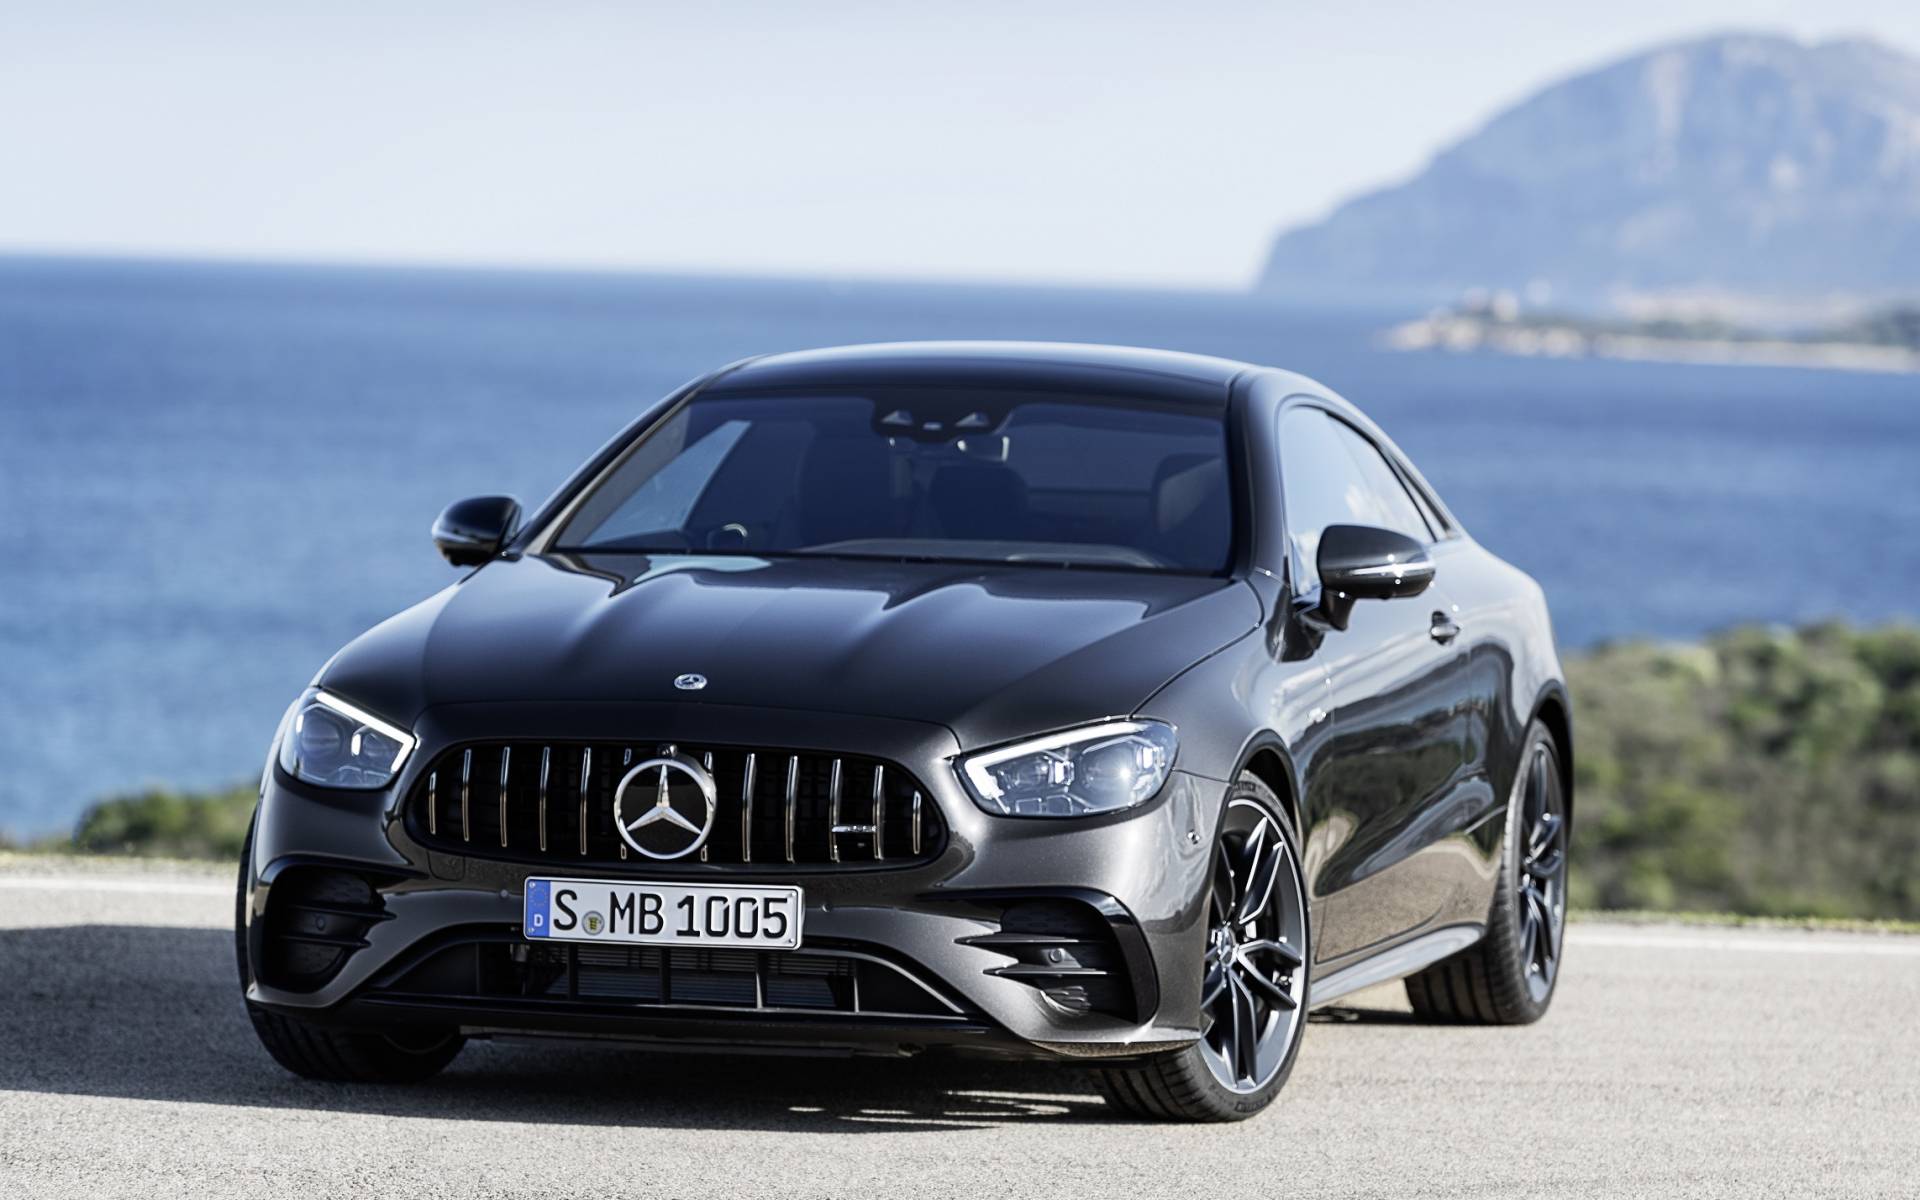 21 Mercedes Benz E Class Coupe And Cabriolet Arrive This Summer The Car Guide